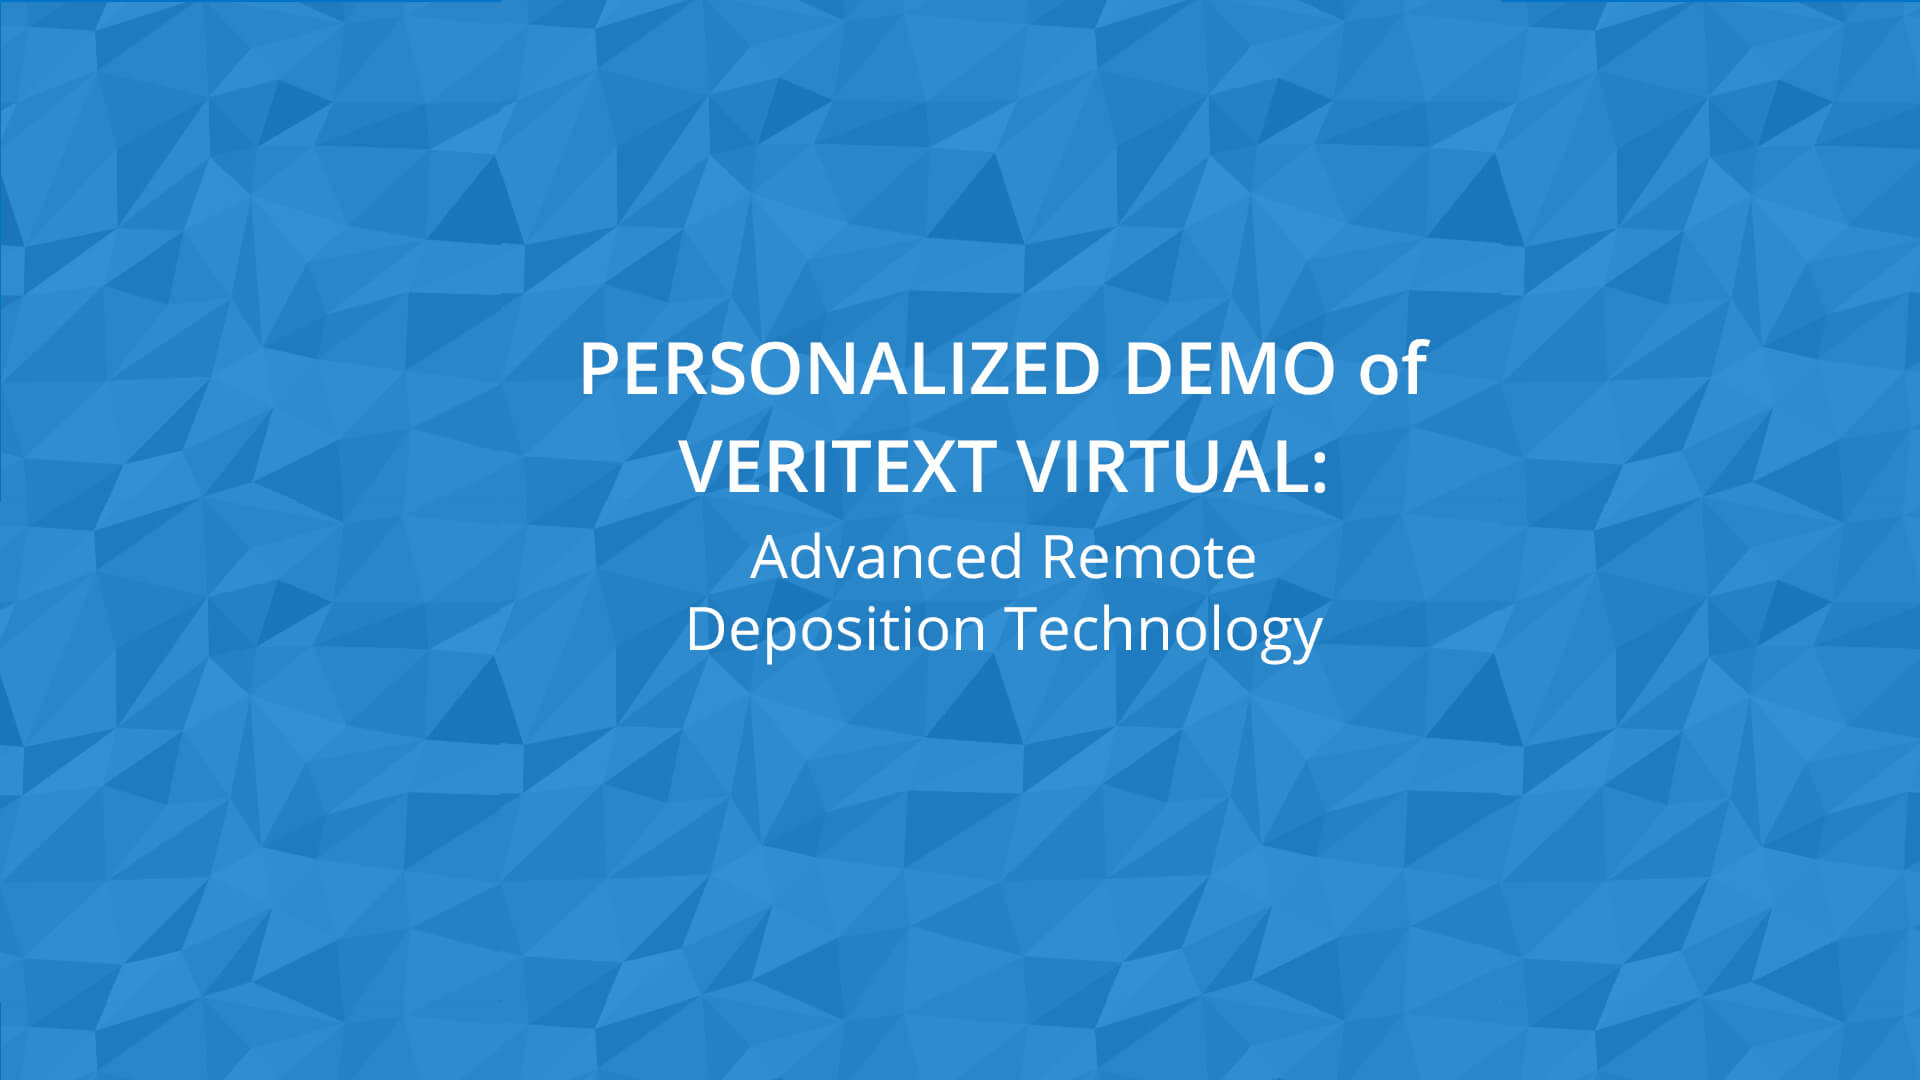 Remote Deposition Technology Demo of Veritext Virtual